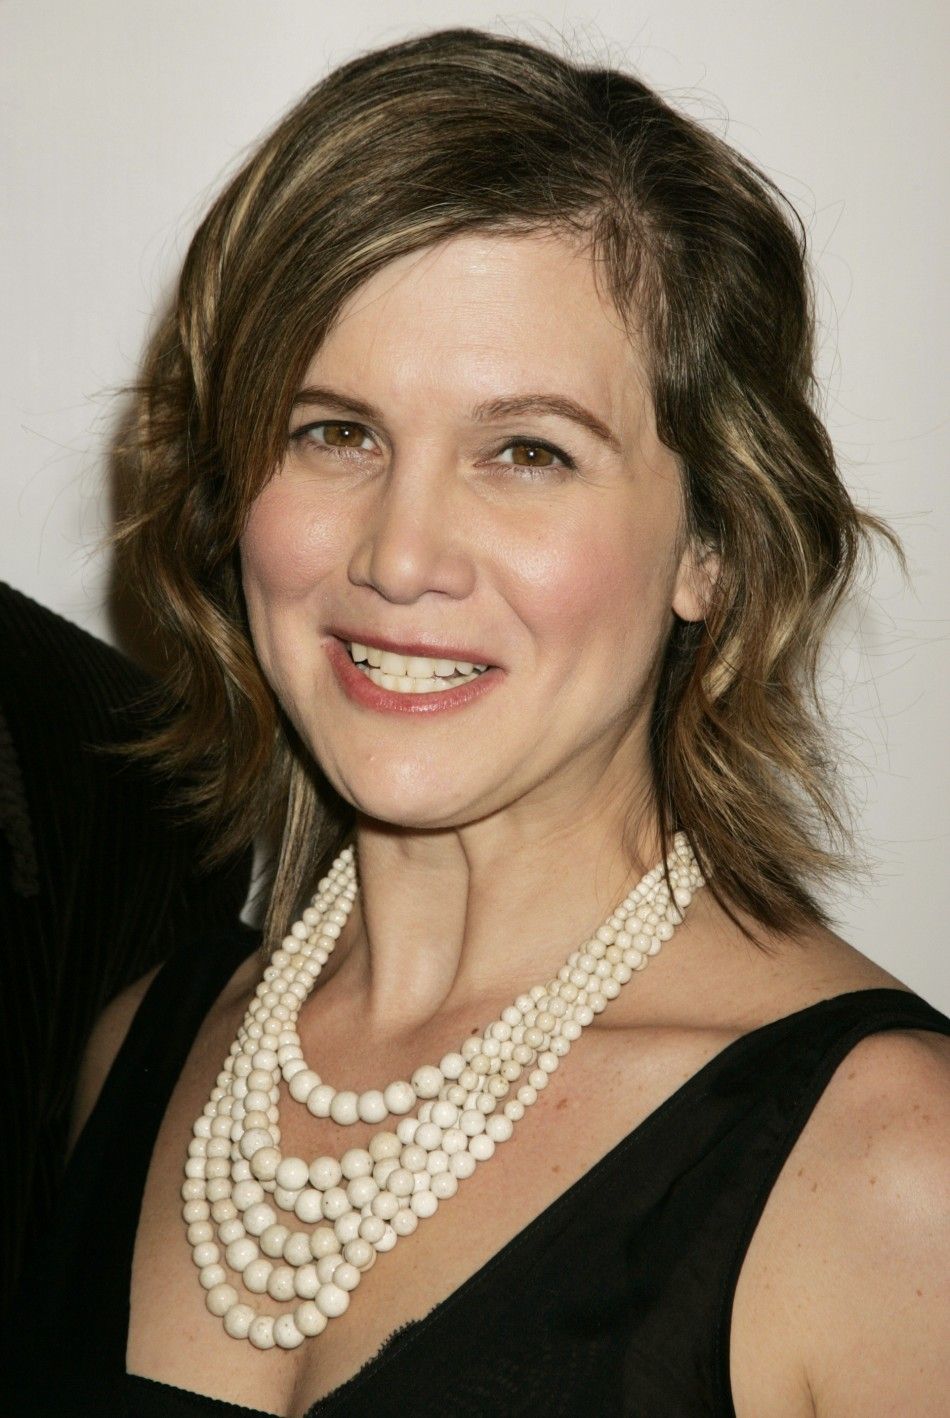 Tracey Gold